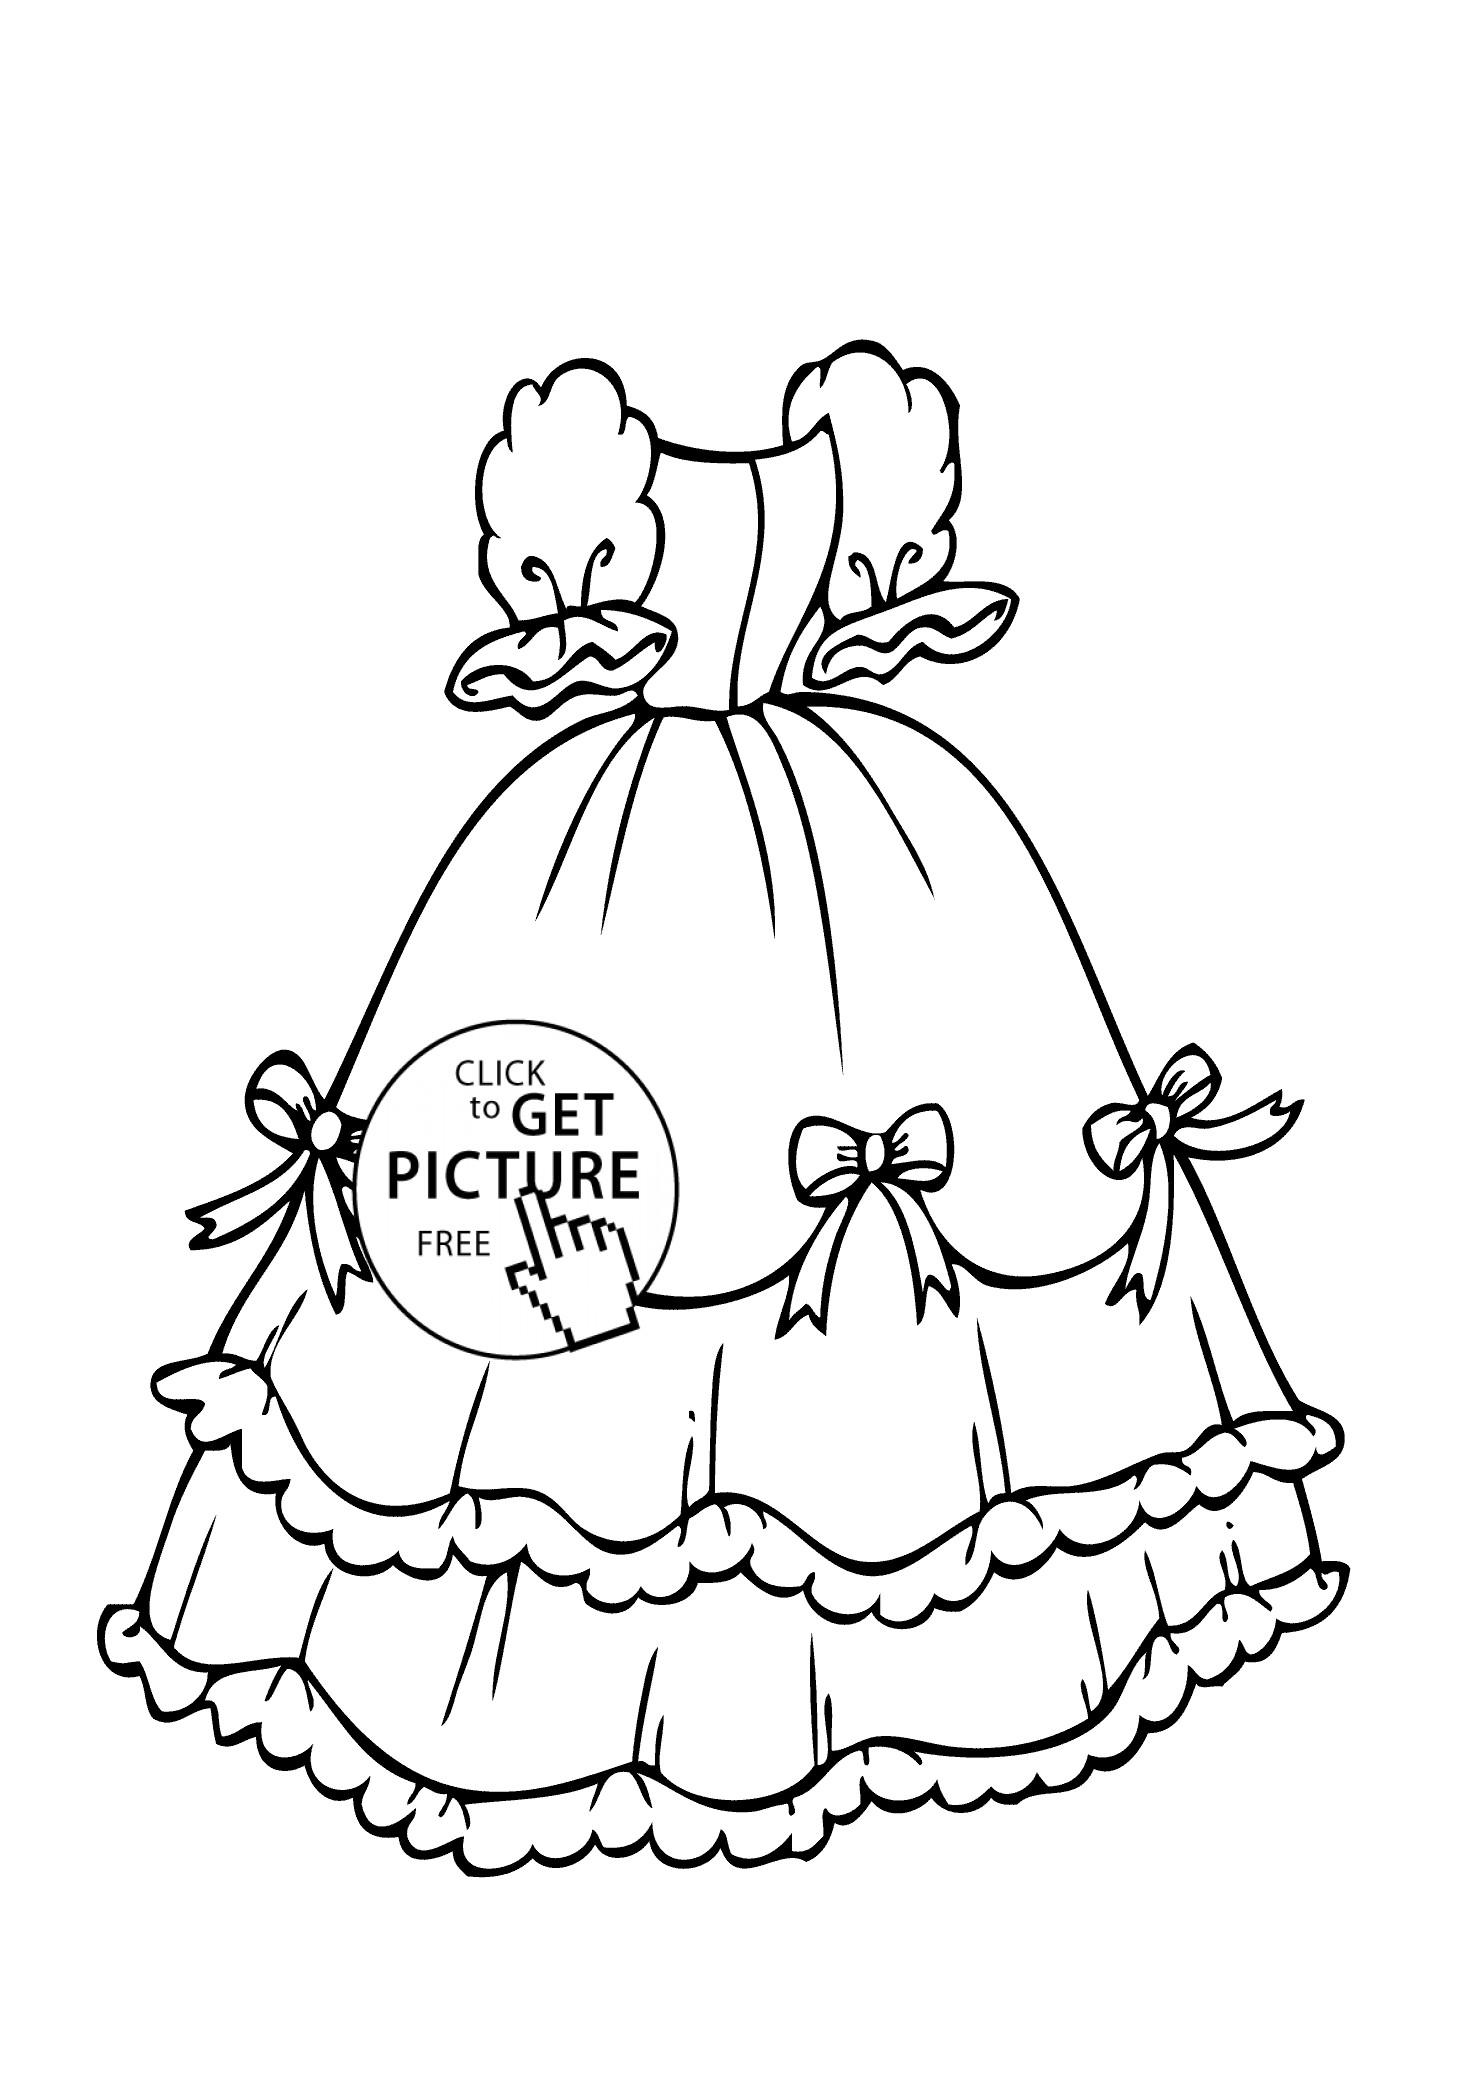 Girls Clothes Coloring Pages
 Dress with bows coloring page for girls printable free